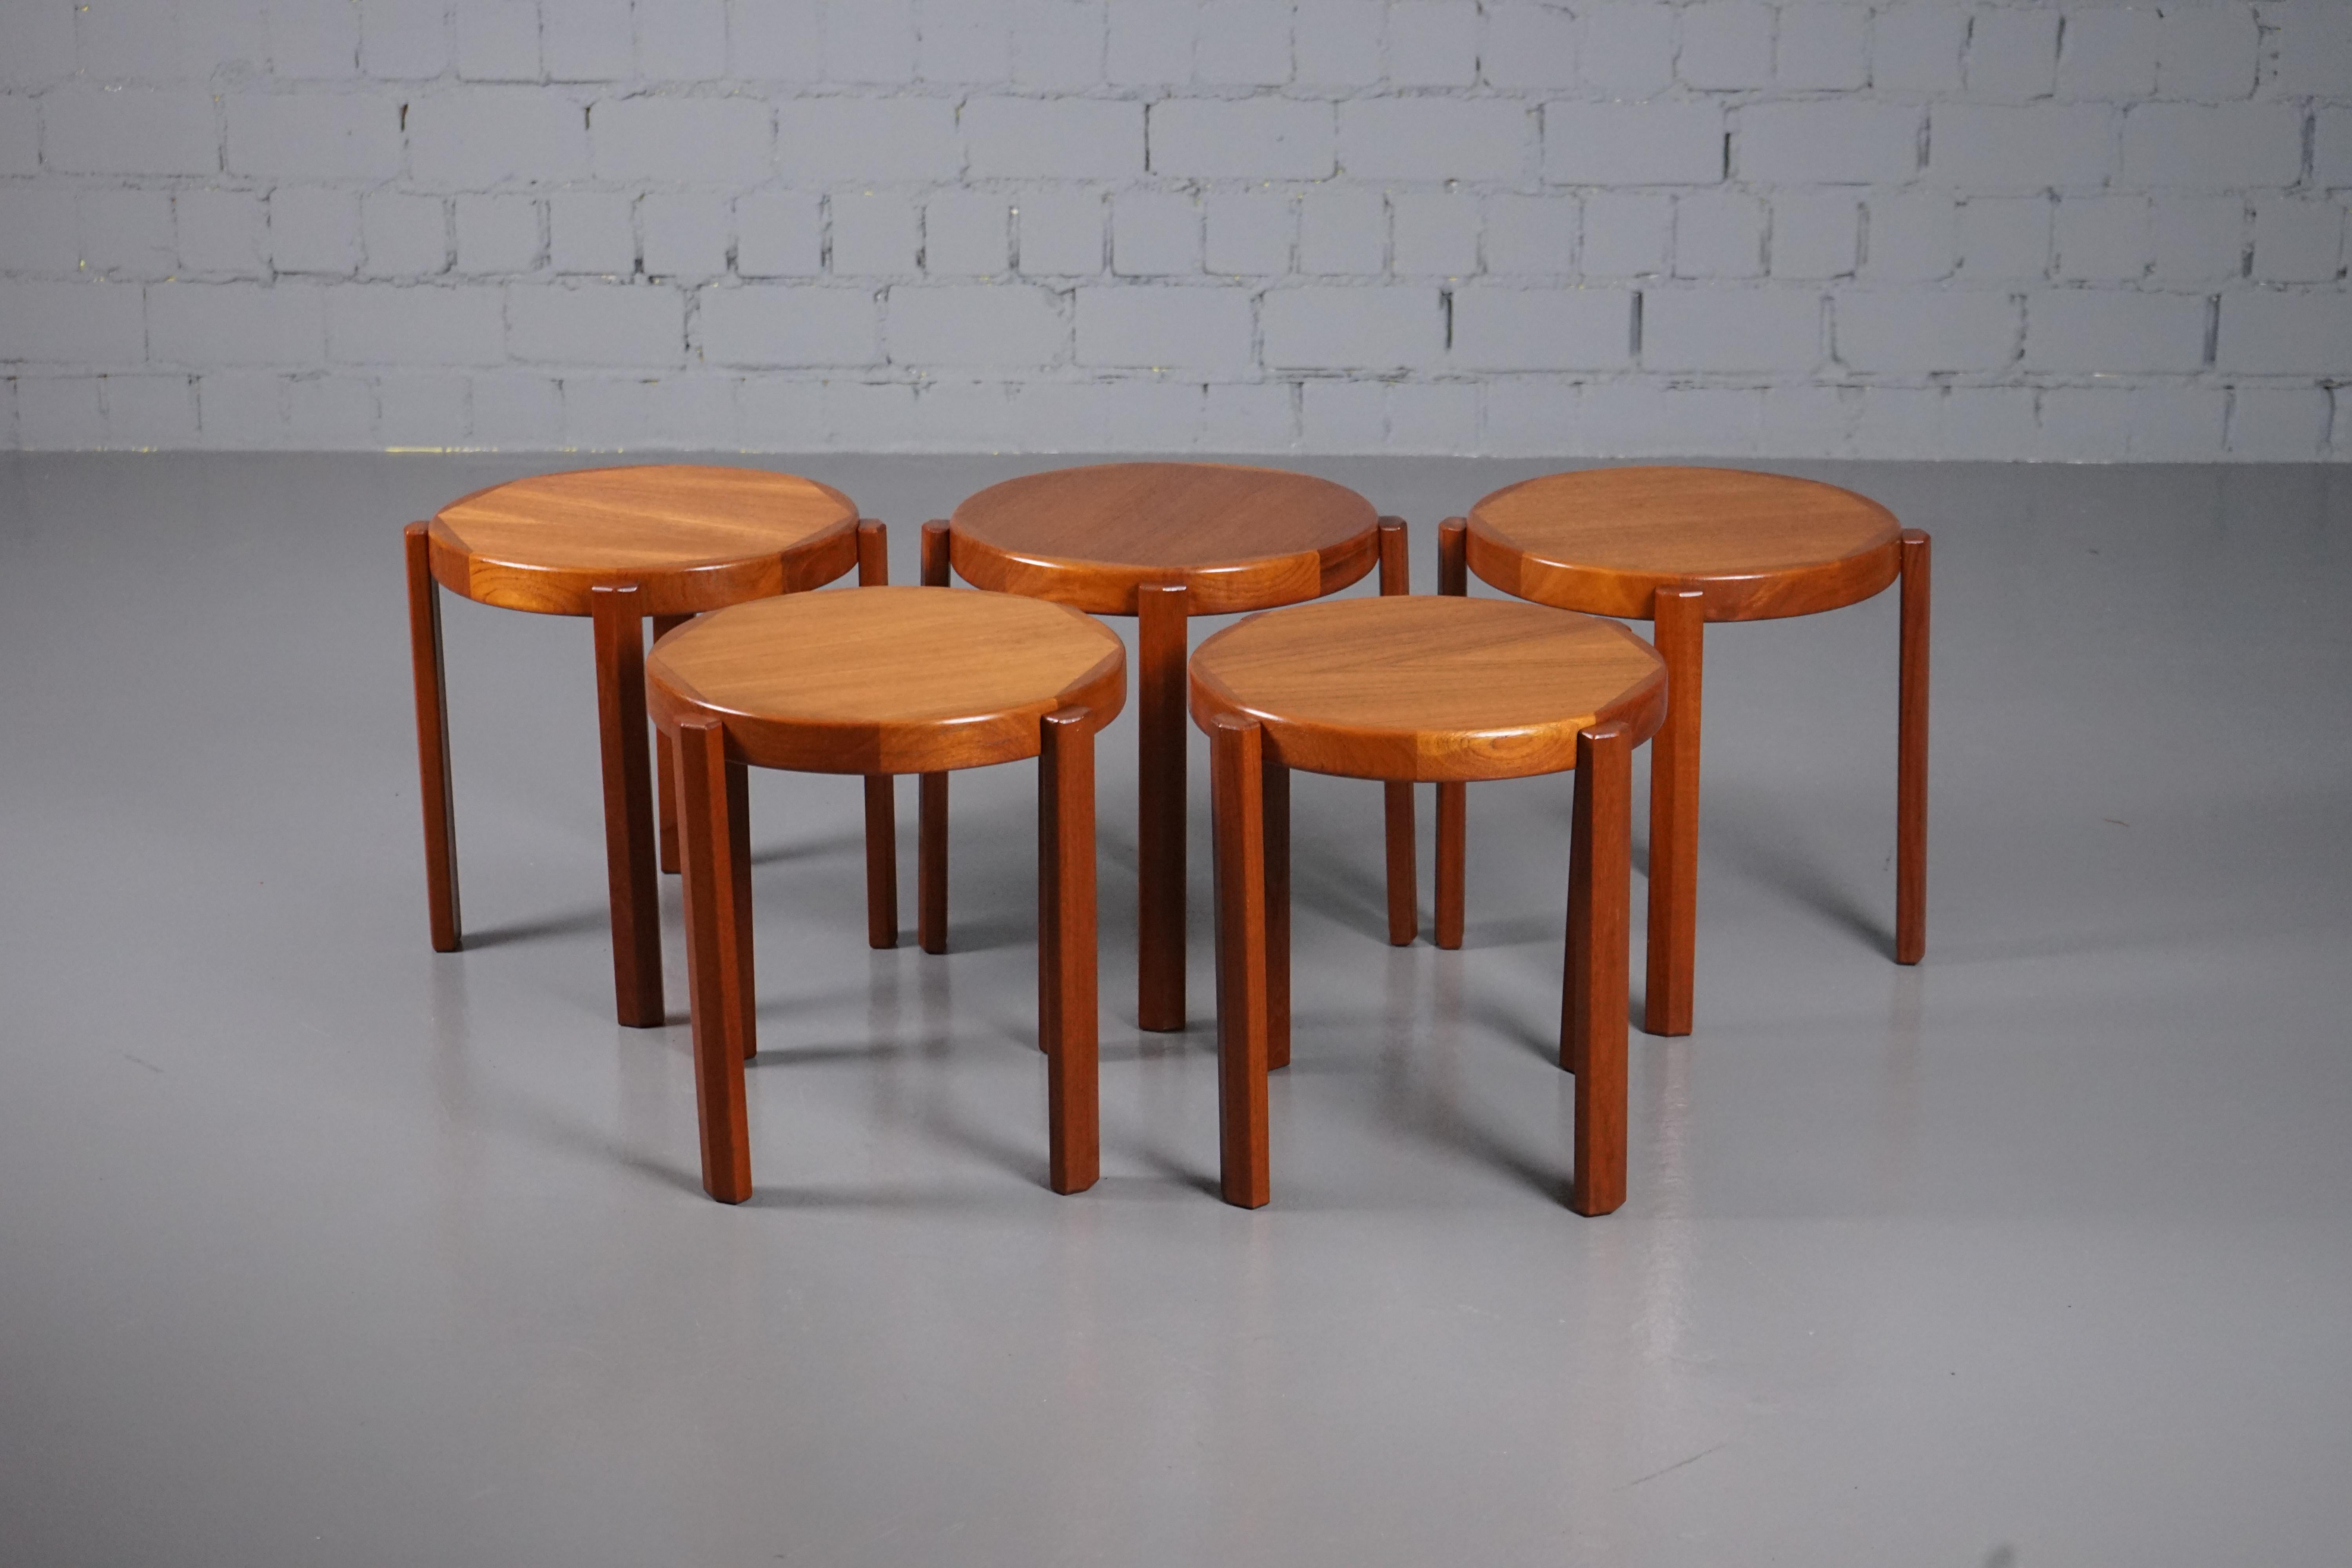 Scandinavian Mid-Century Modern teak tables by Mobelfabrikken Toften, Set of 5.
Good original condition with signs of age and use.